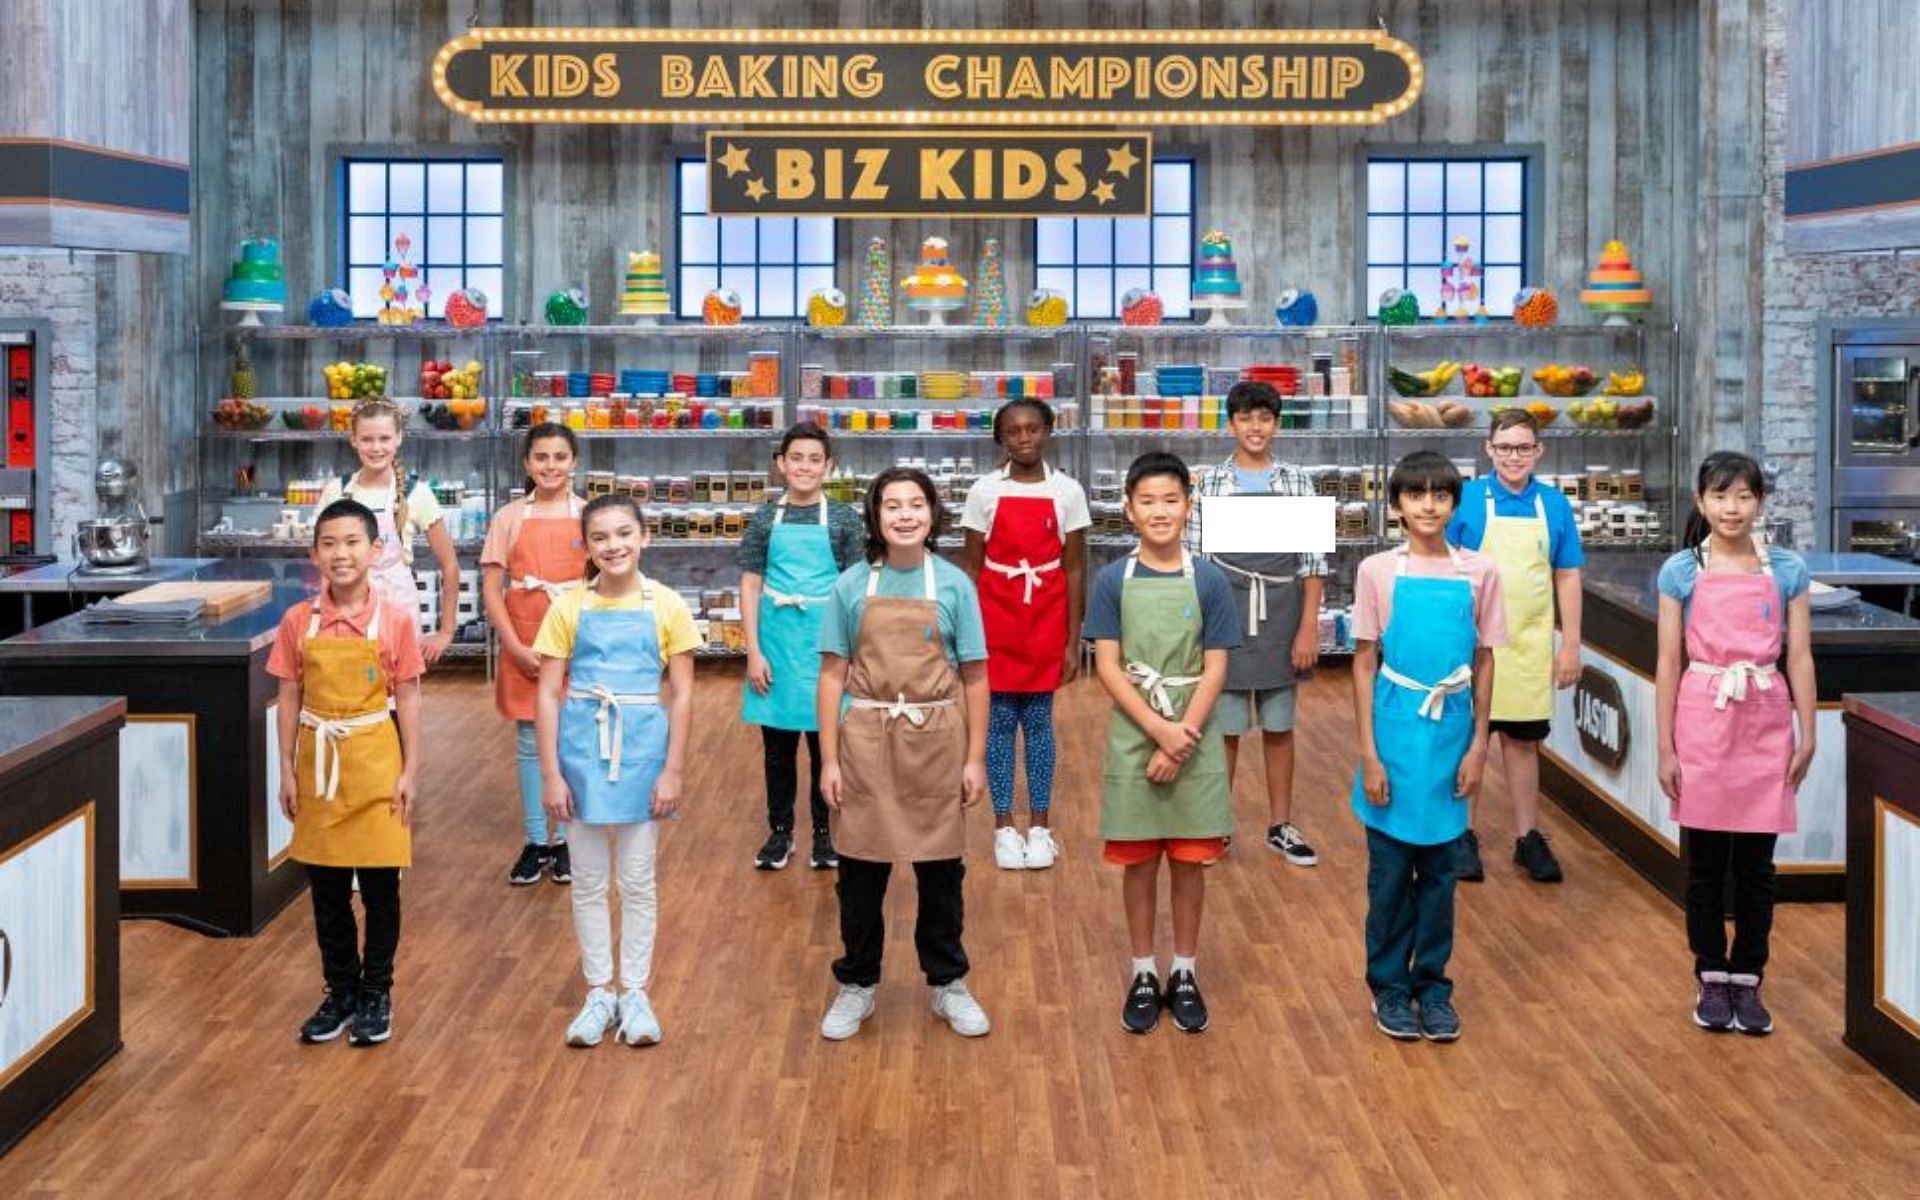 Meet the hosts and judges of Kids Baking Championship season 11